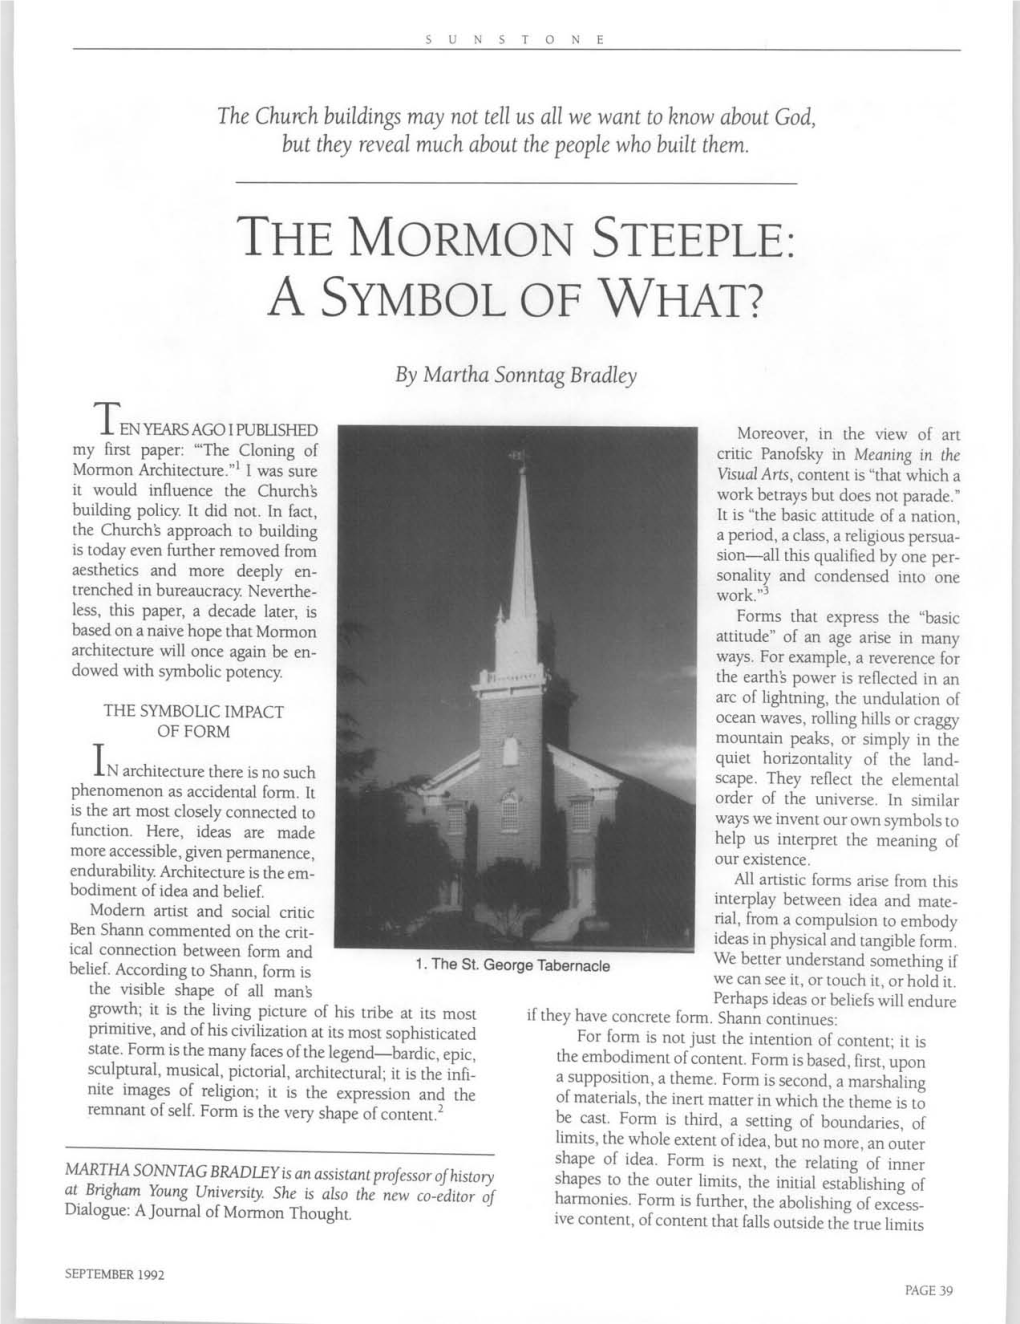 The Mormon Steeple: a Symbol of What?